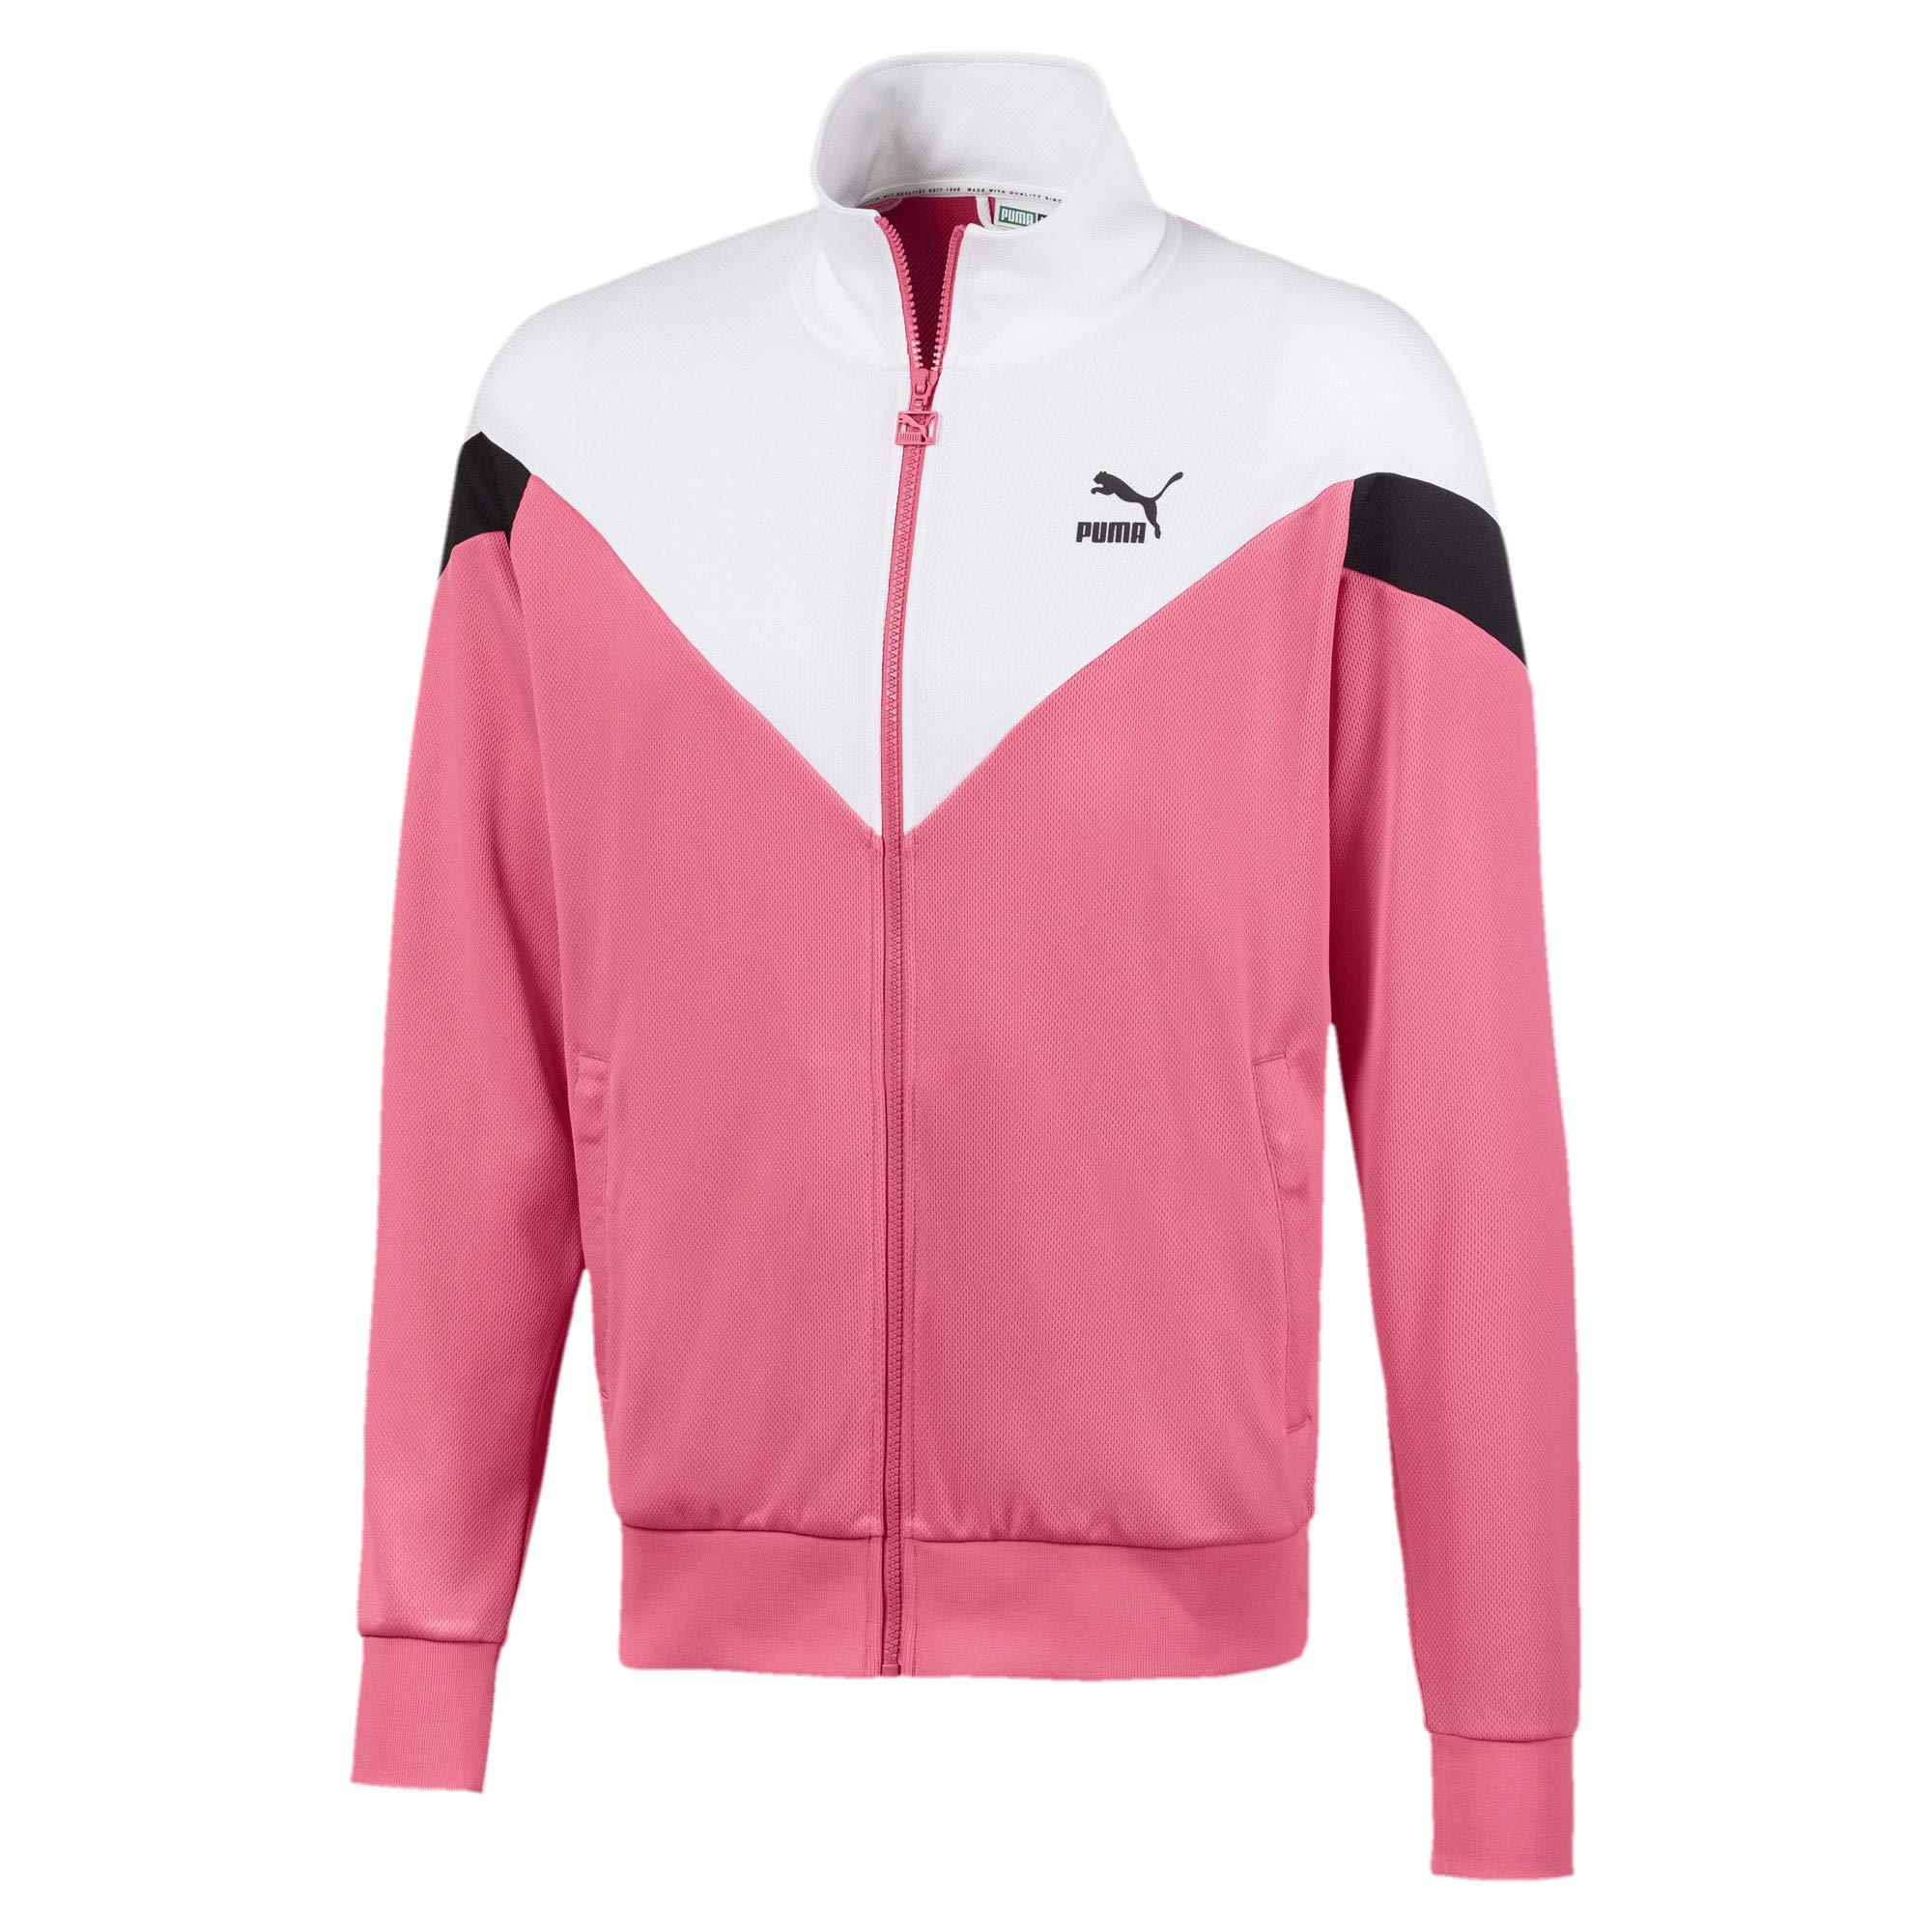 PUMA Iconic Mcs Track Jacket Summerized in Bubblegum (Pink) for Men - Lyst